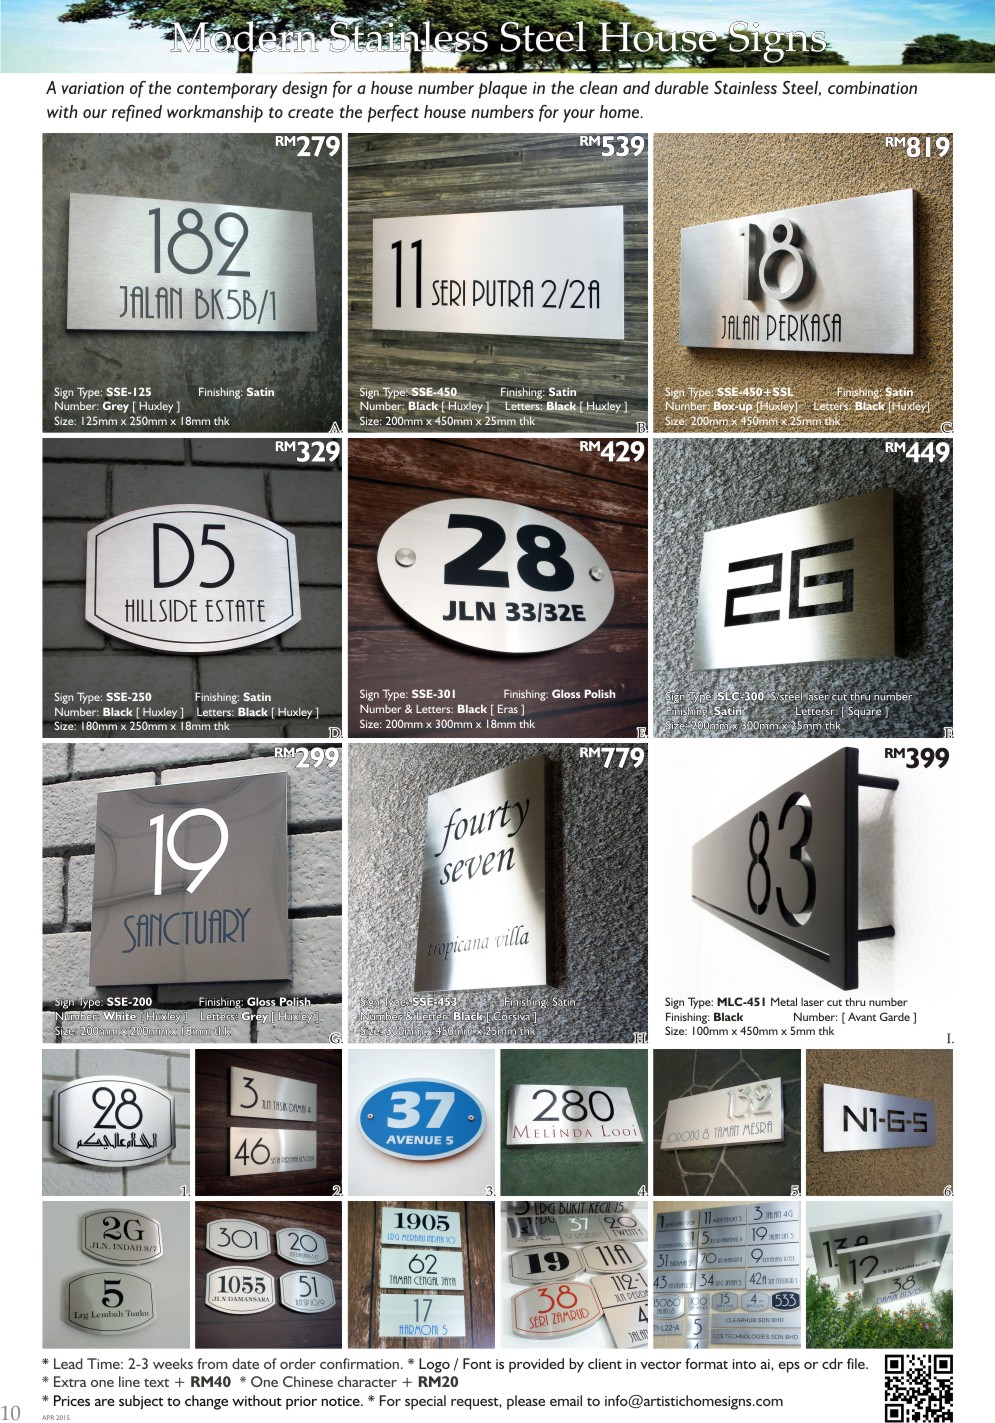 2015 Modern Stainless Steel House Signs